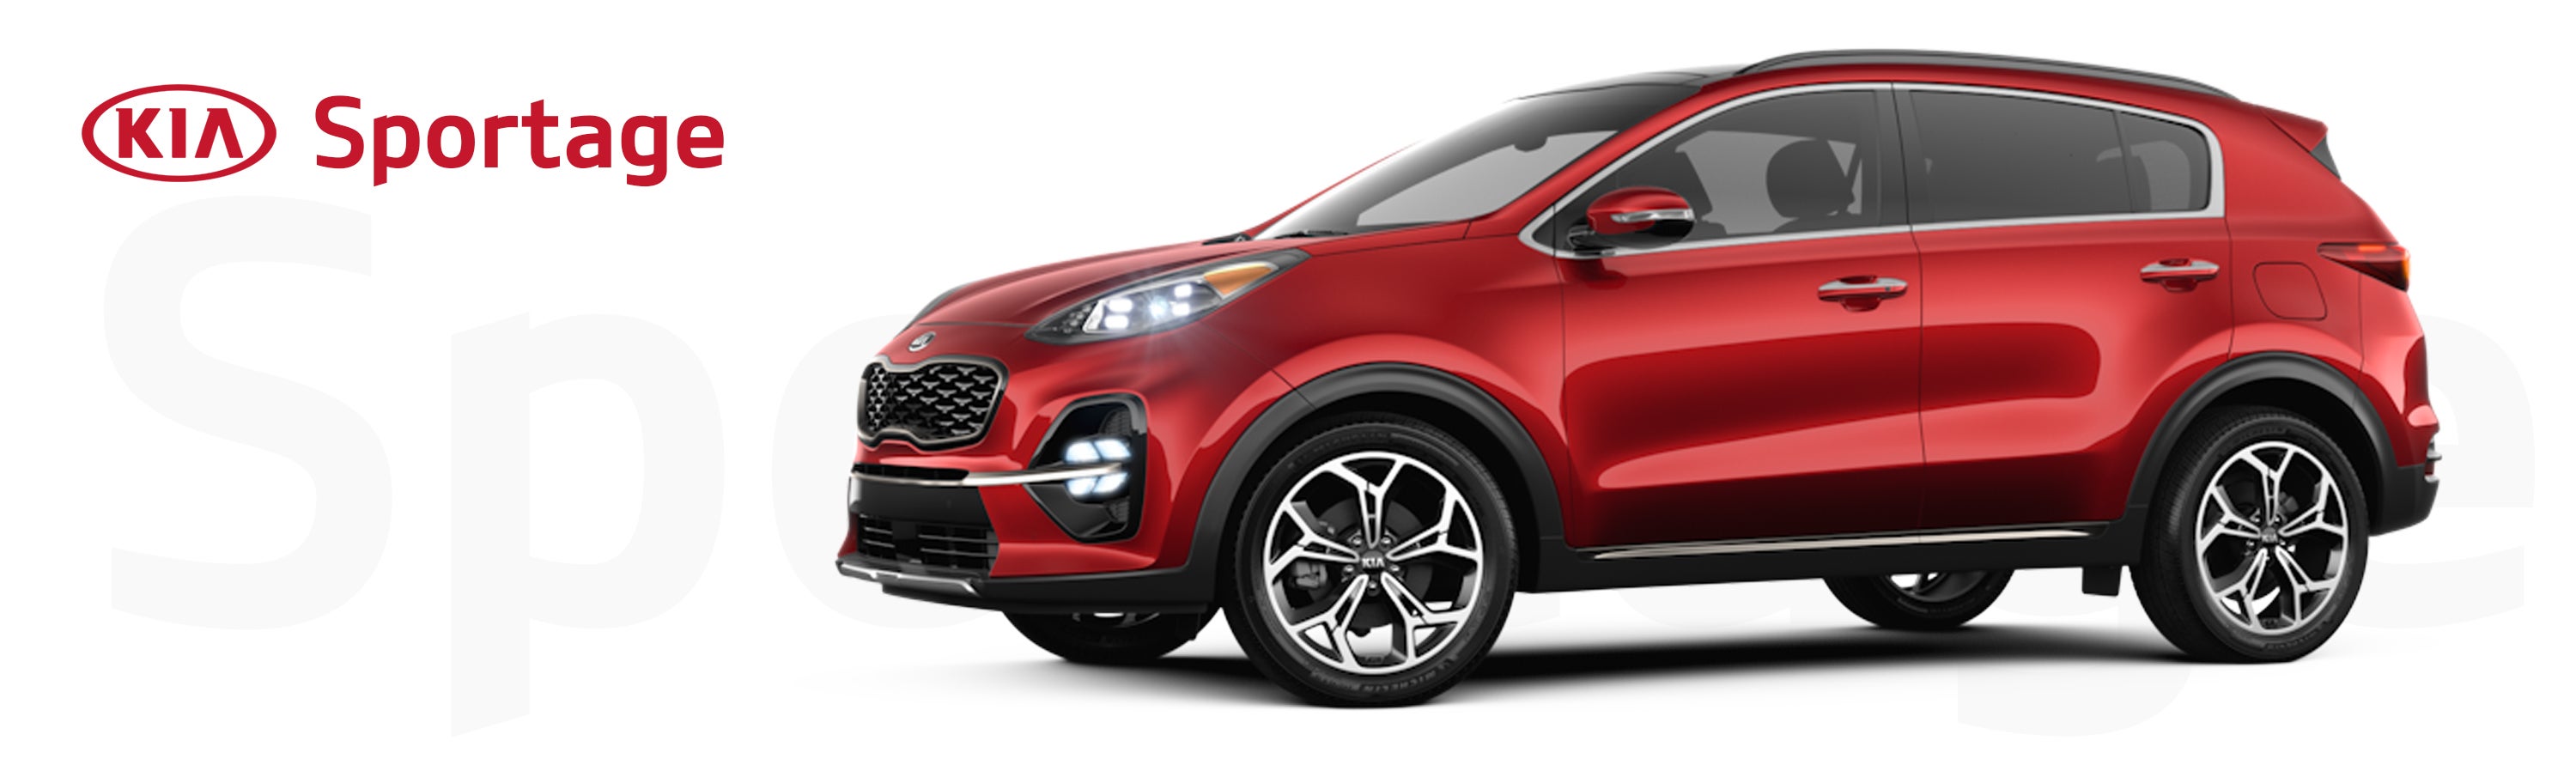 2020 Kia Sportage at Clay Cooley Kia Irving in Irving TX